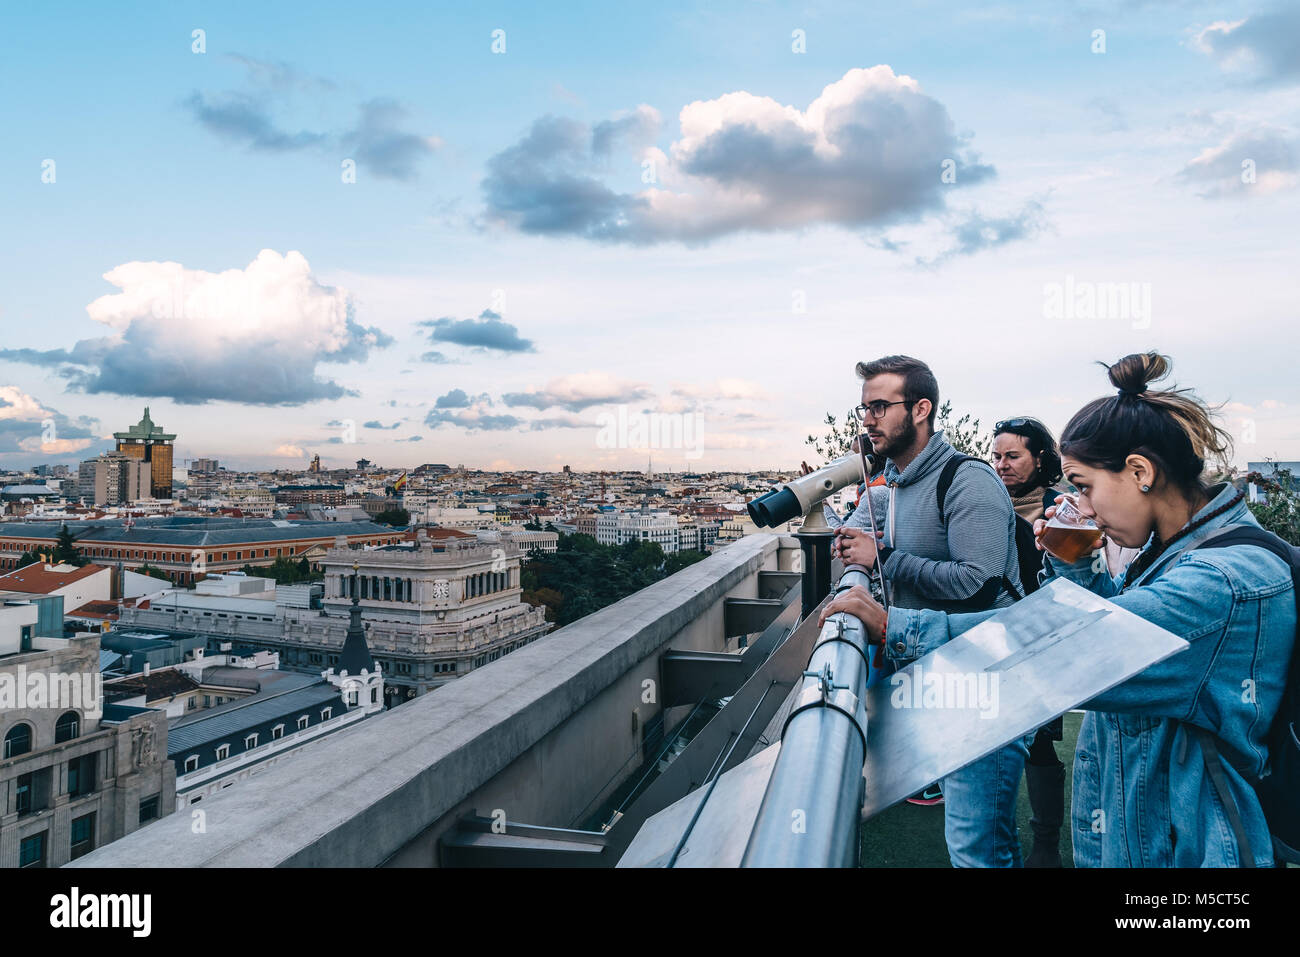 Madrid, Spain - November 3, 2017:  People looking at skyline at rooftop on Circulo de Bellas Artes of Madrid at sunset. Stock Photo